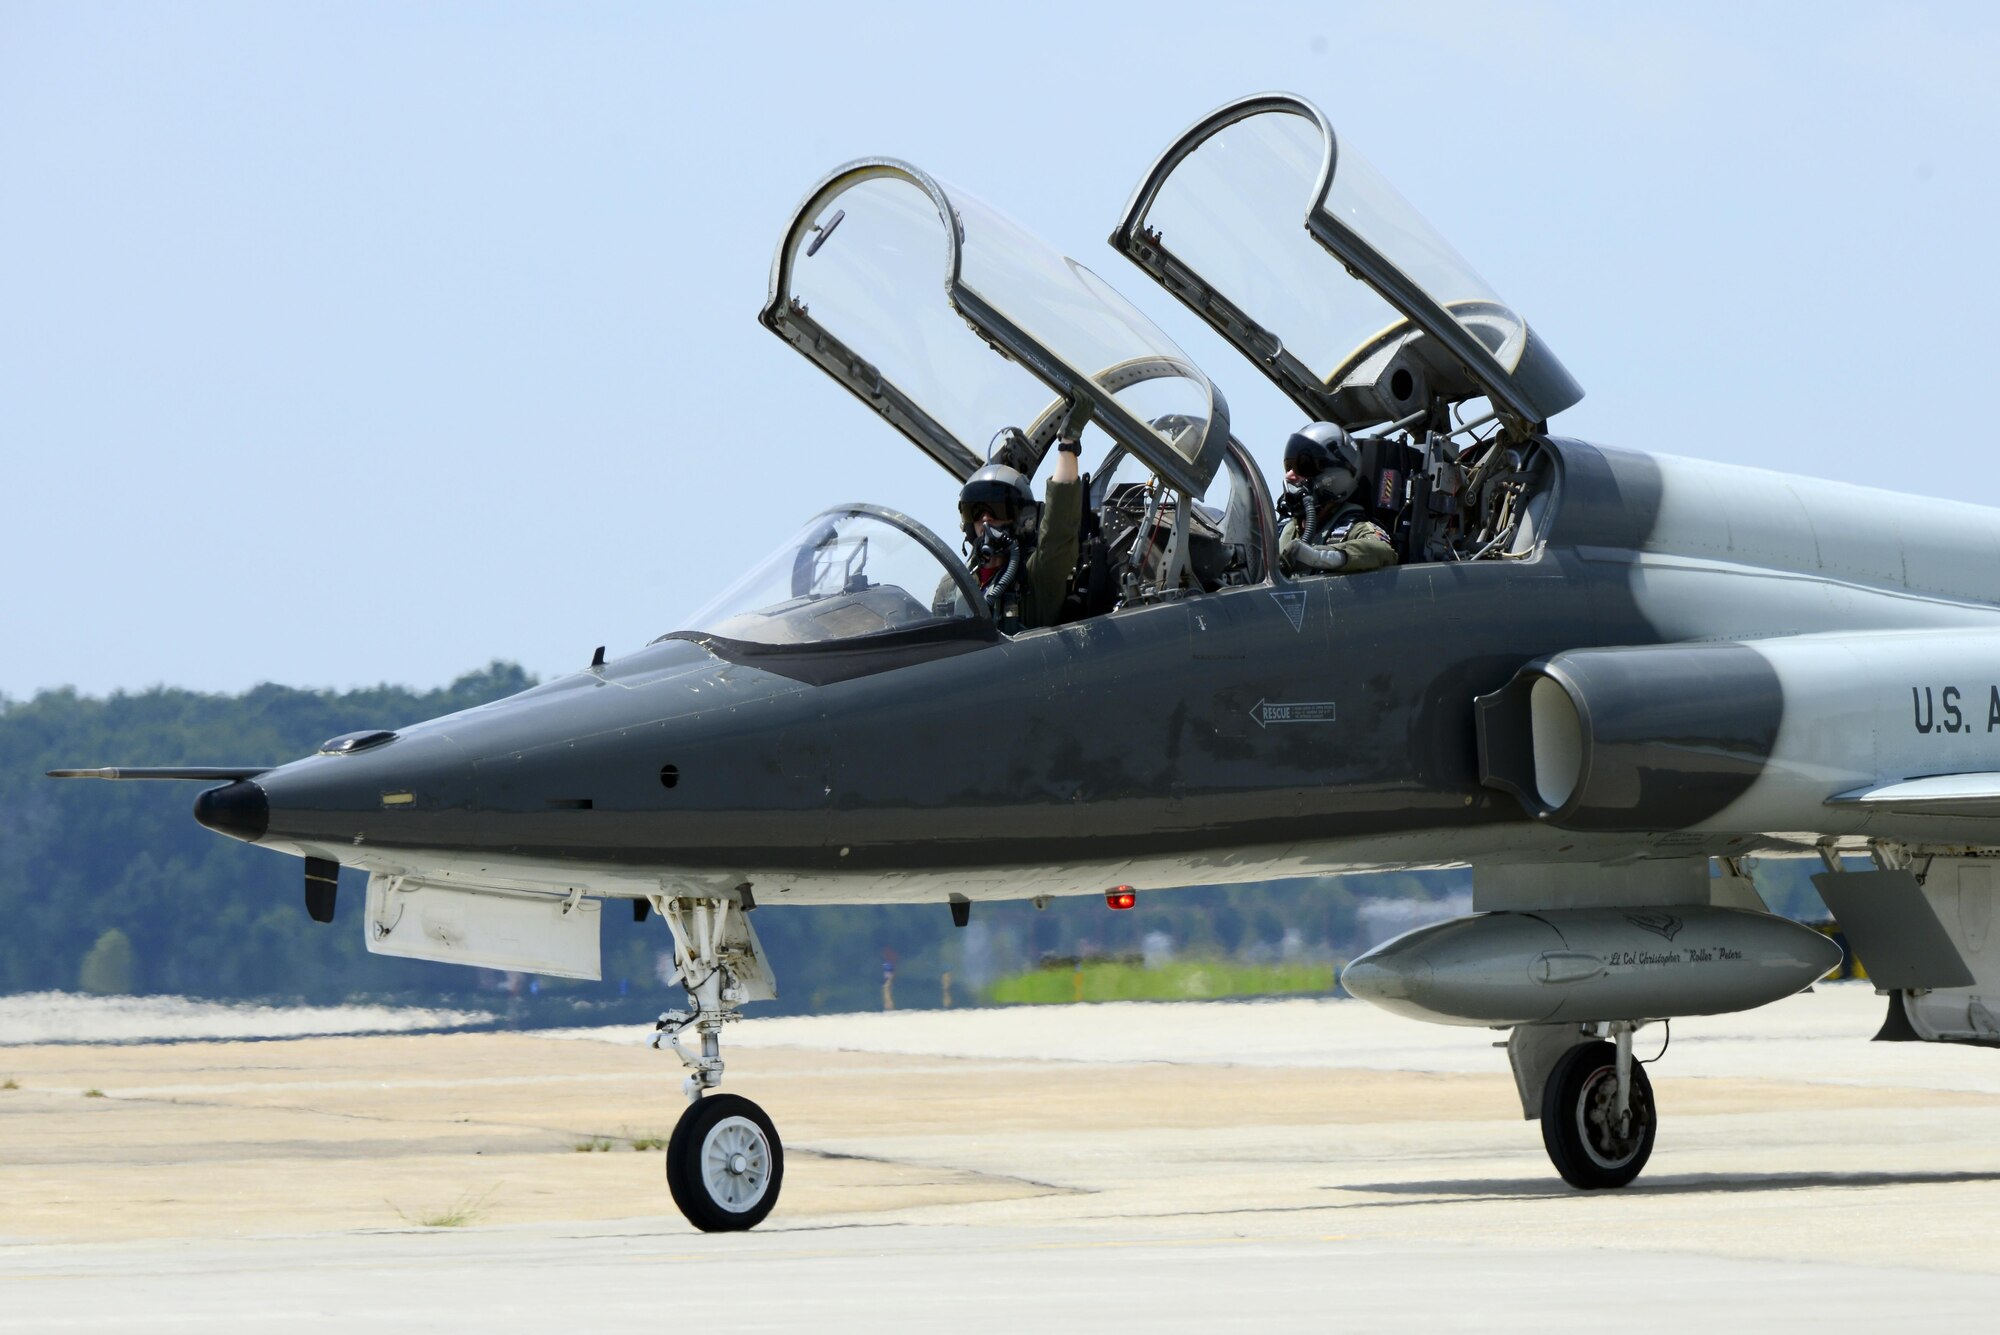 A U.S. Air Force T-38 Talon taxis on the flight line at Langley Air Force Base, Va., following a 95th Anniversary Maj. Gen. William “Billy” Mitchell memorial reenactment, July 22, 2016. In honor of Mitchell, pilots from across the Air Force gathered to reenact Mitchell’s airpower trials which demonstrated aviation’s place in the U.S. military on July 21, 1921. (U.S. Air Force photo by Staff Sgt. R. Alex Durbin) 